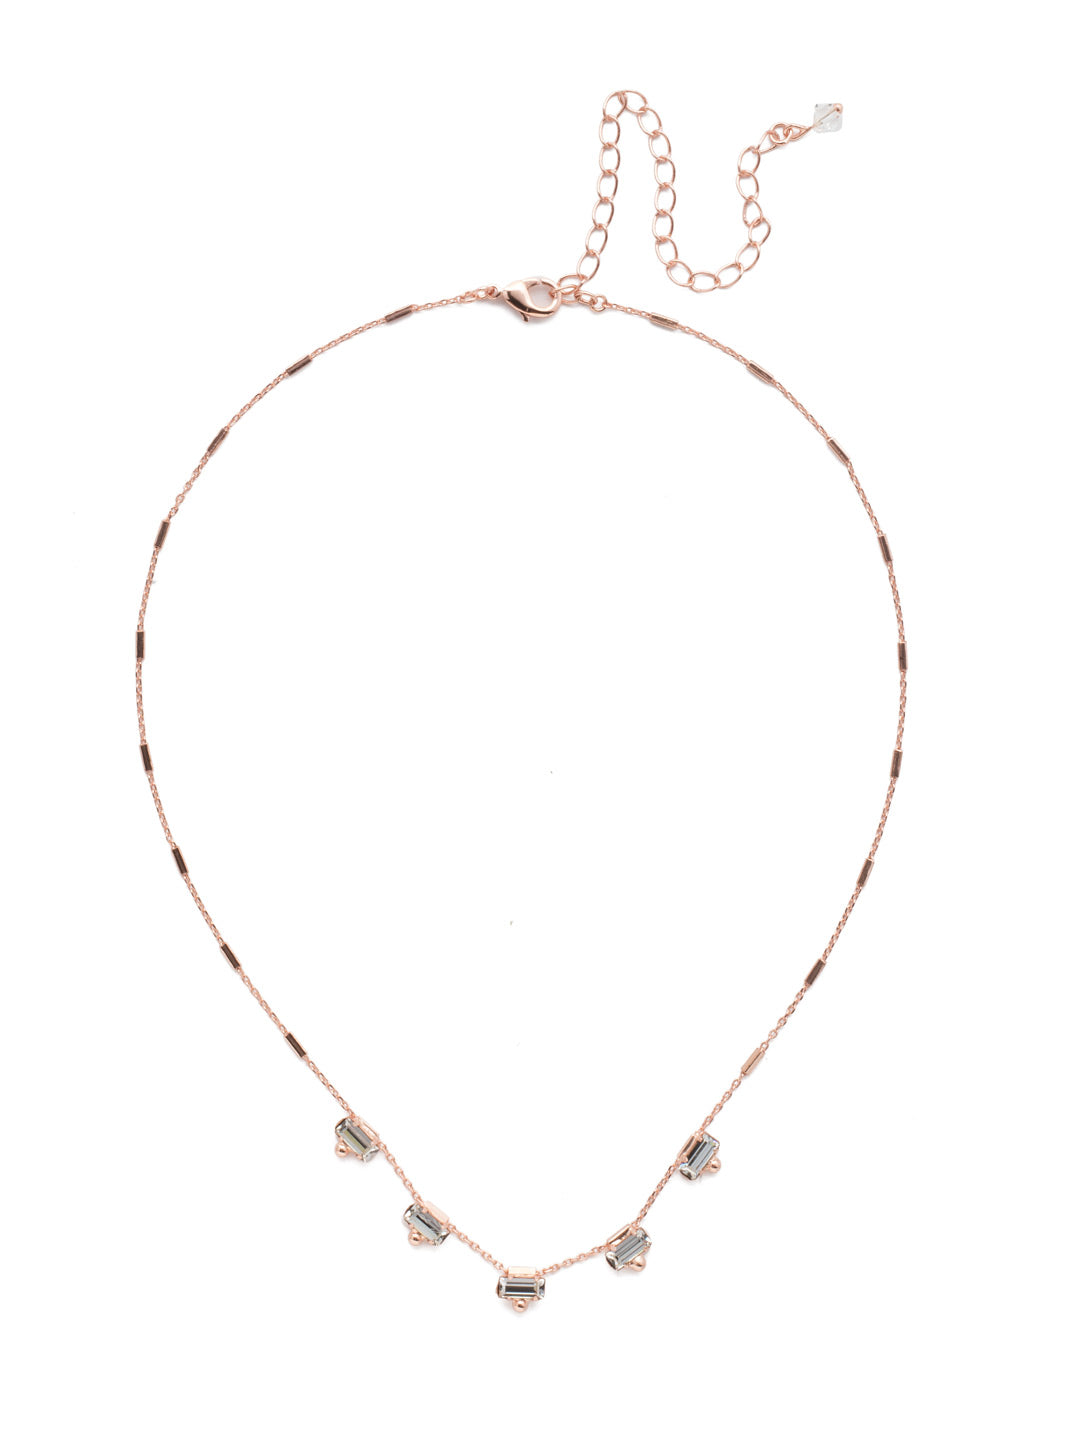 Shine and Dash Tennis Necklace - NDM17RGCRY - <p>Beautifully faceted baguette crystals set in rectangular row offer simple styling that will add a pop of sparkle to your look. From Sorrelli's Crystal collection in our Rose Gold-tone finish.</p>